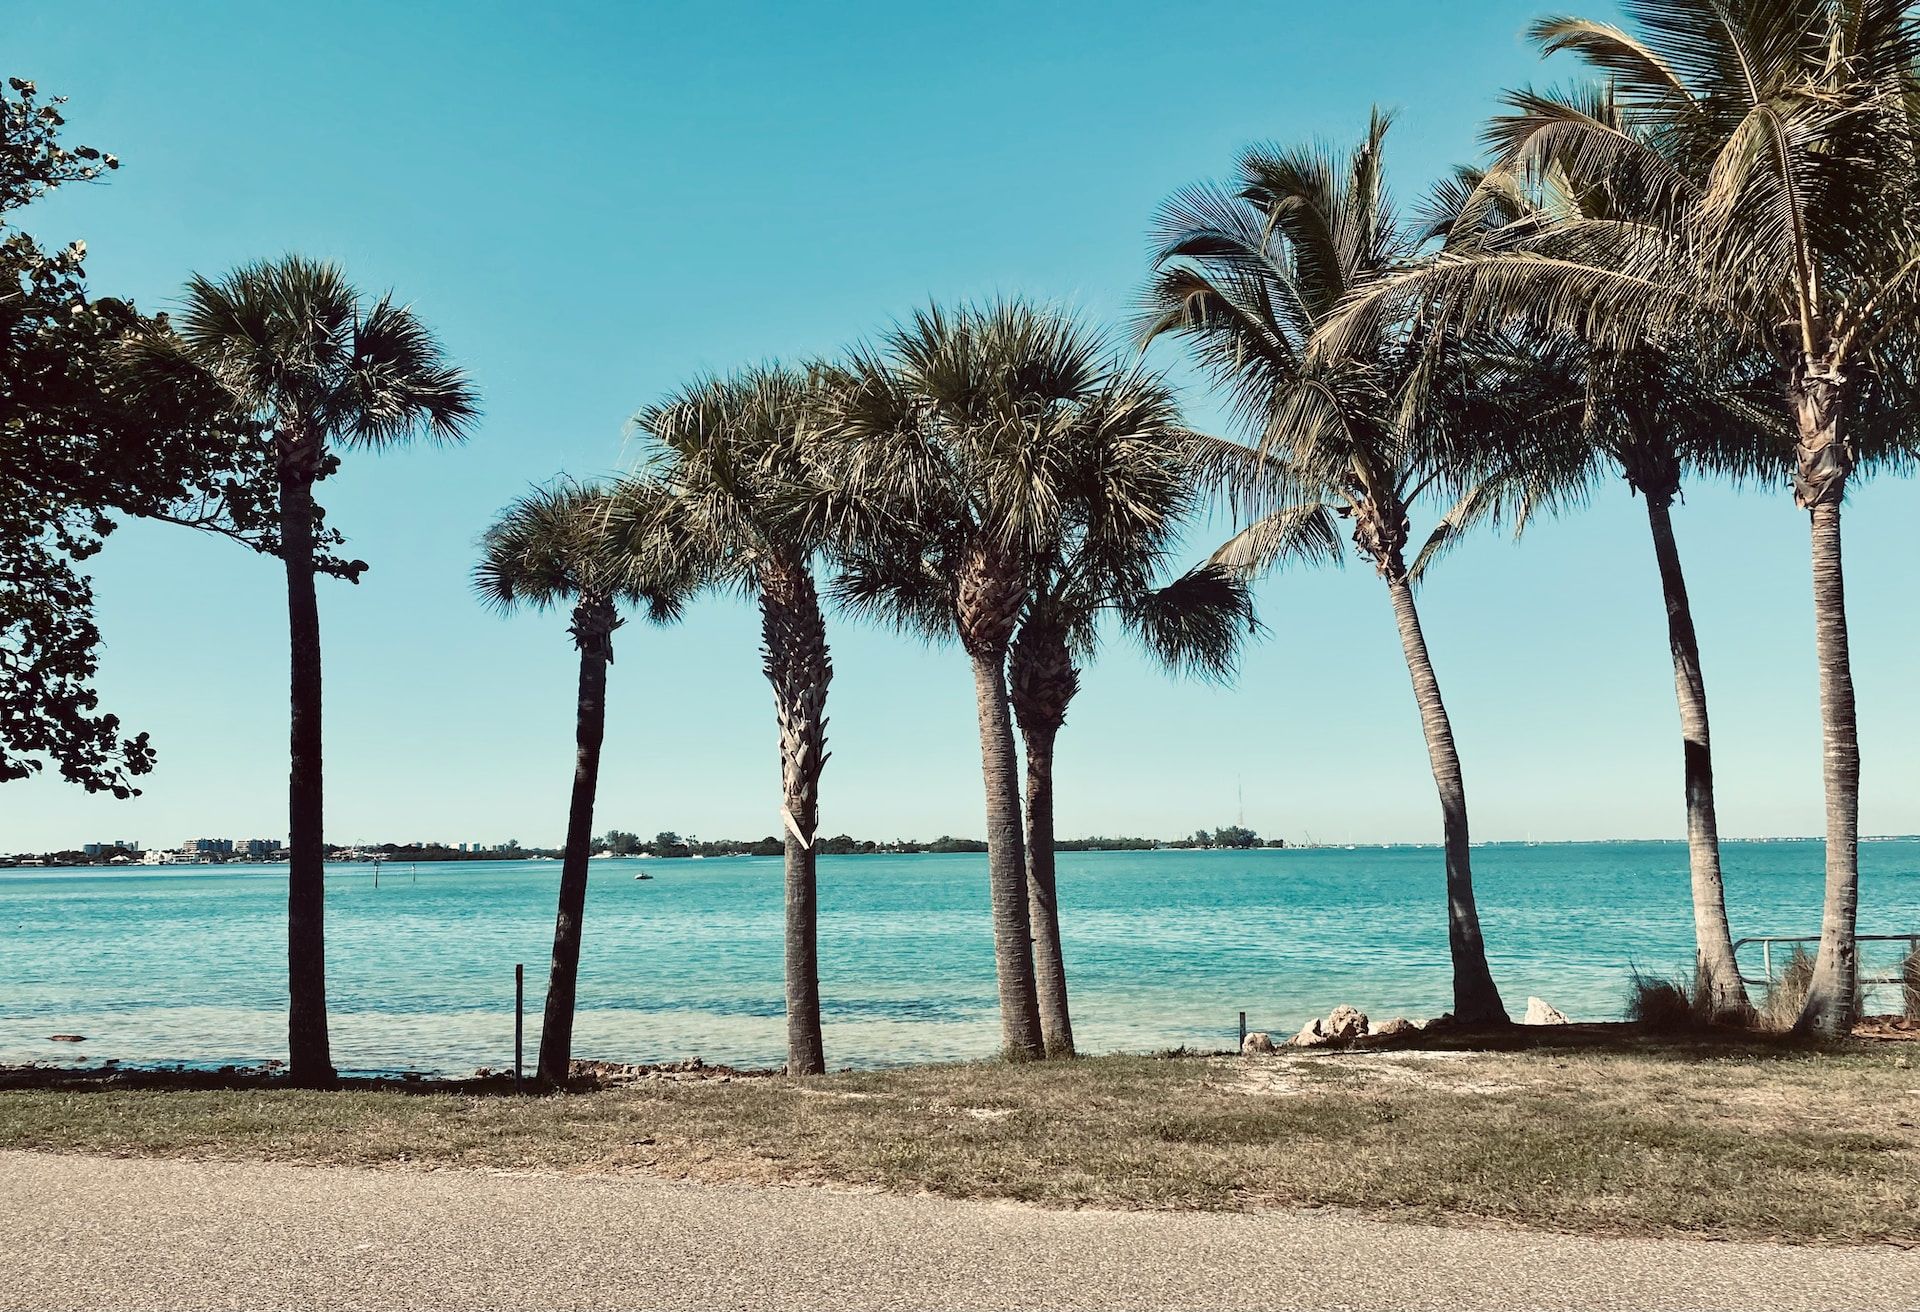 Beachside Palm Trees in Tampa, Florida